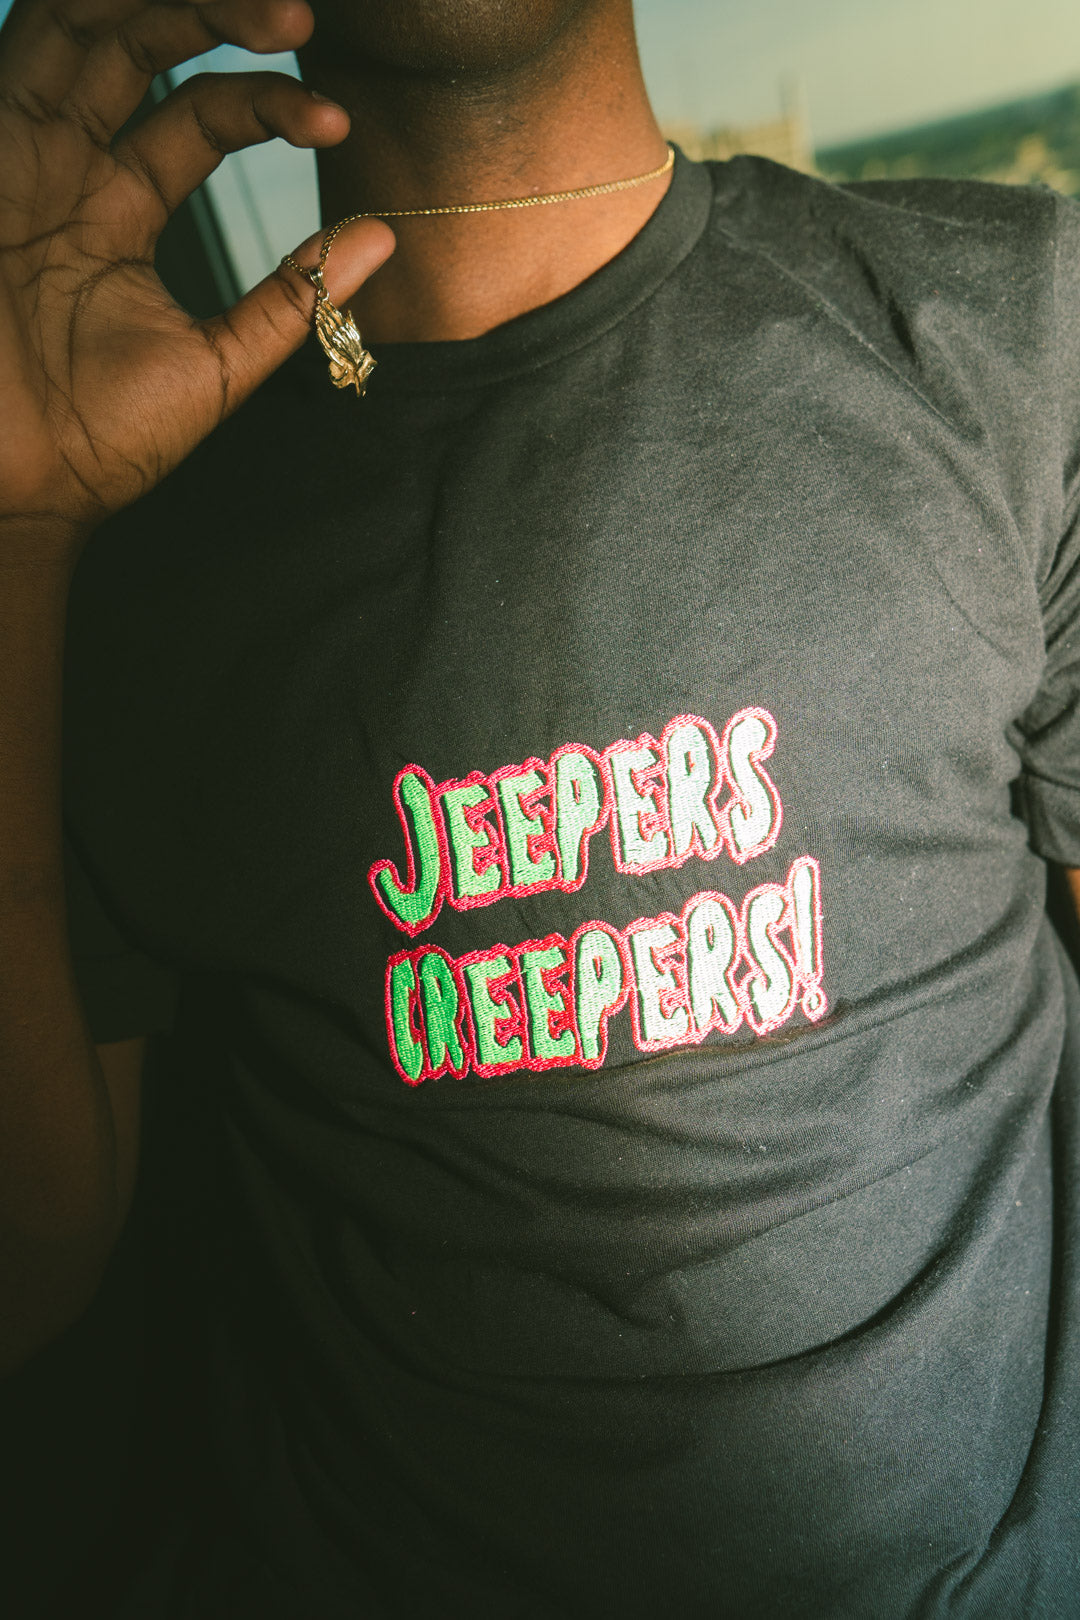 Jeepers Creepers! Tee (Limited Edition)